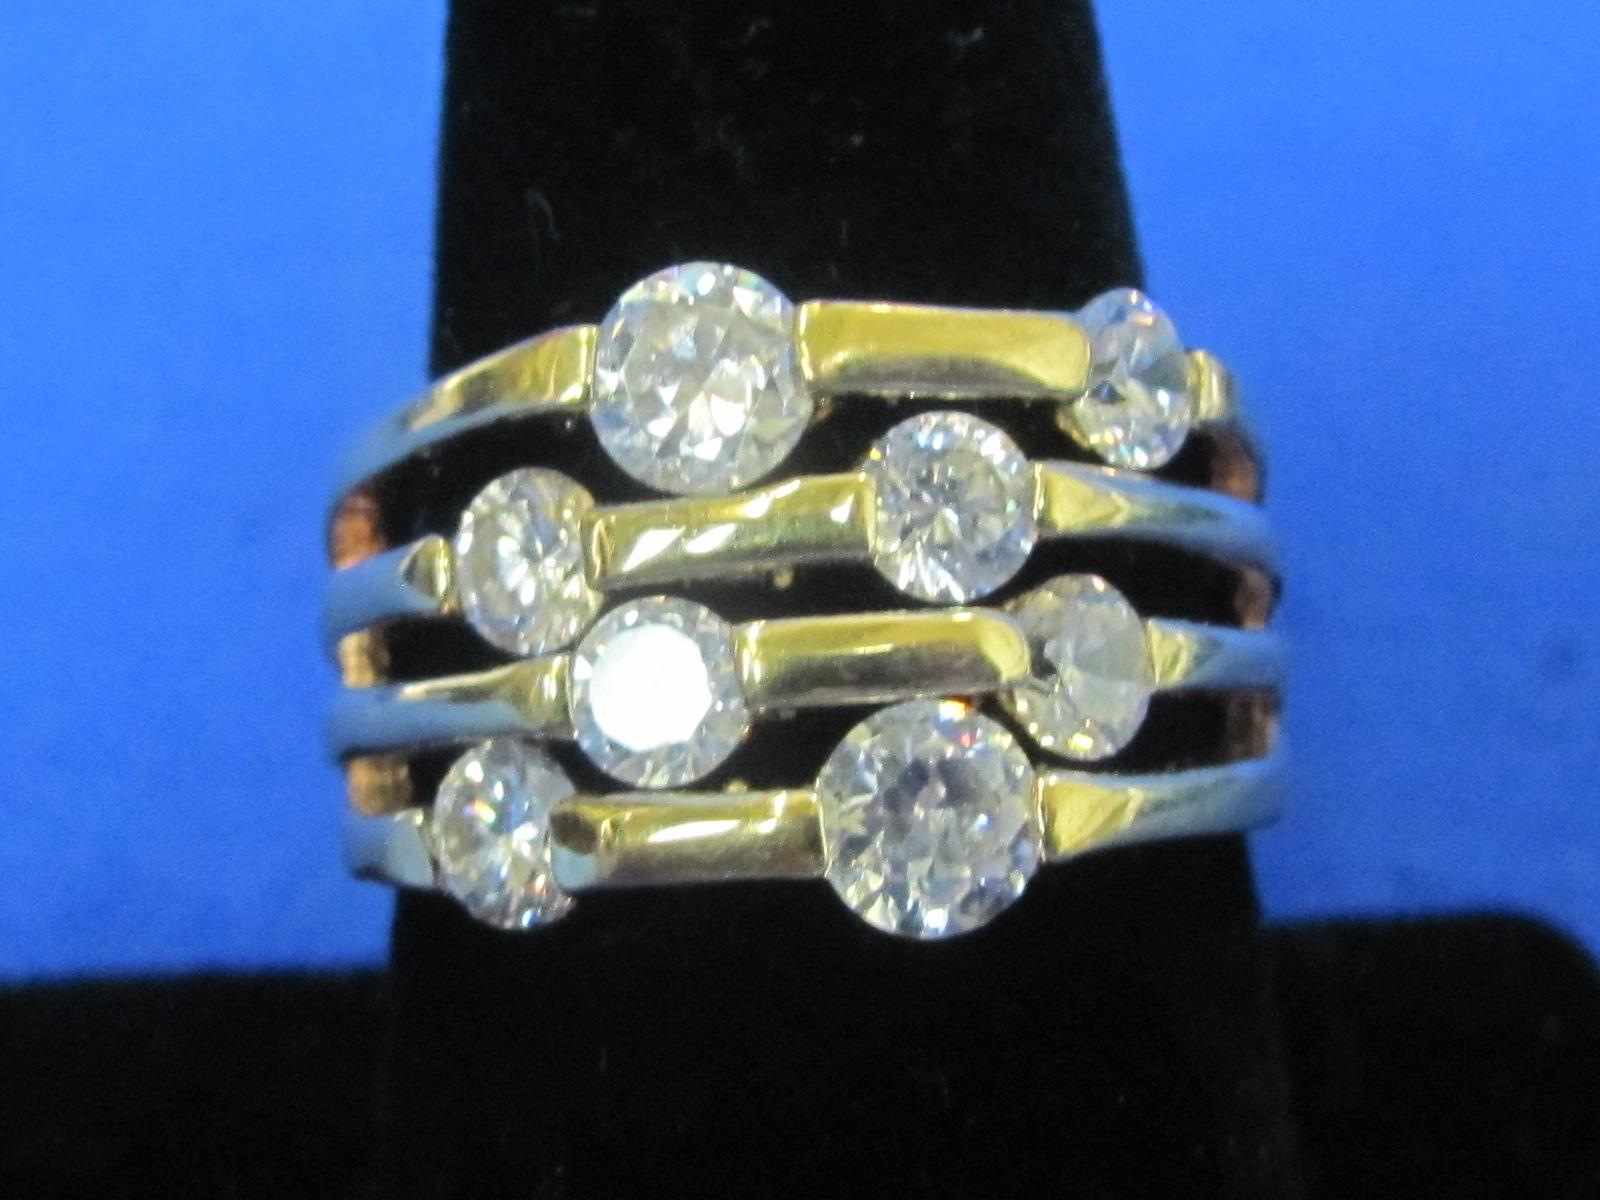 3 Costume Rings: 2 are 18 Kt Gold Filled – Sizes 6 to 8.5